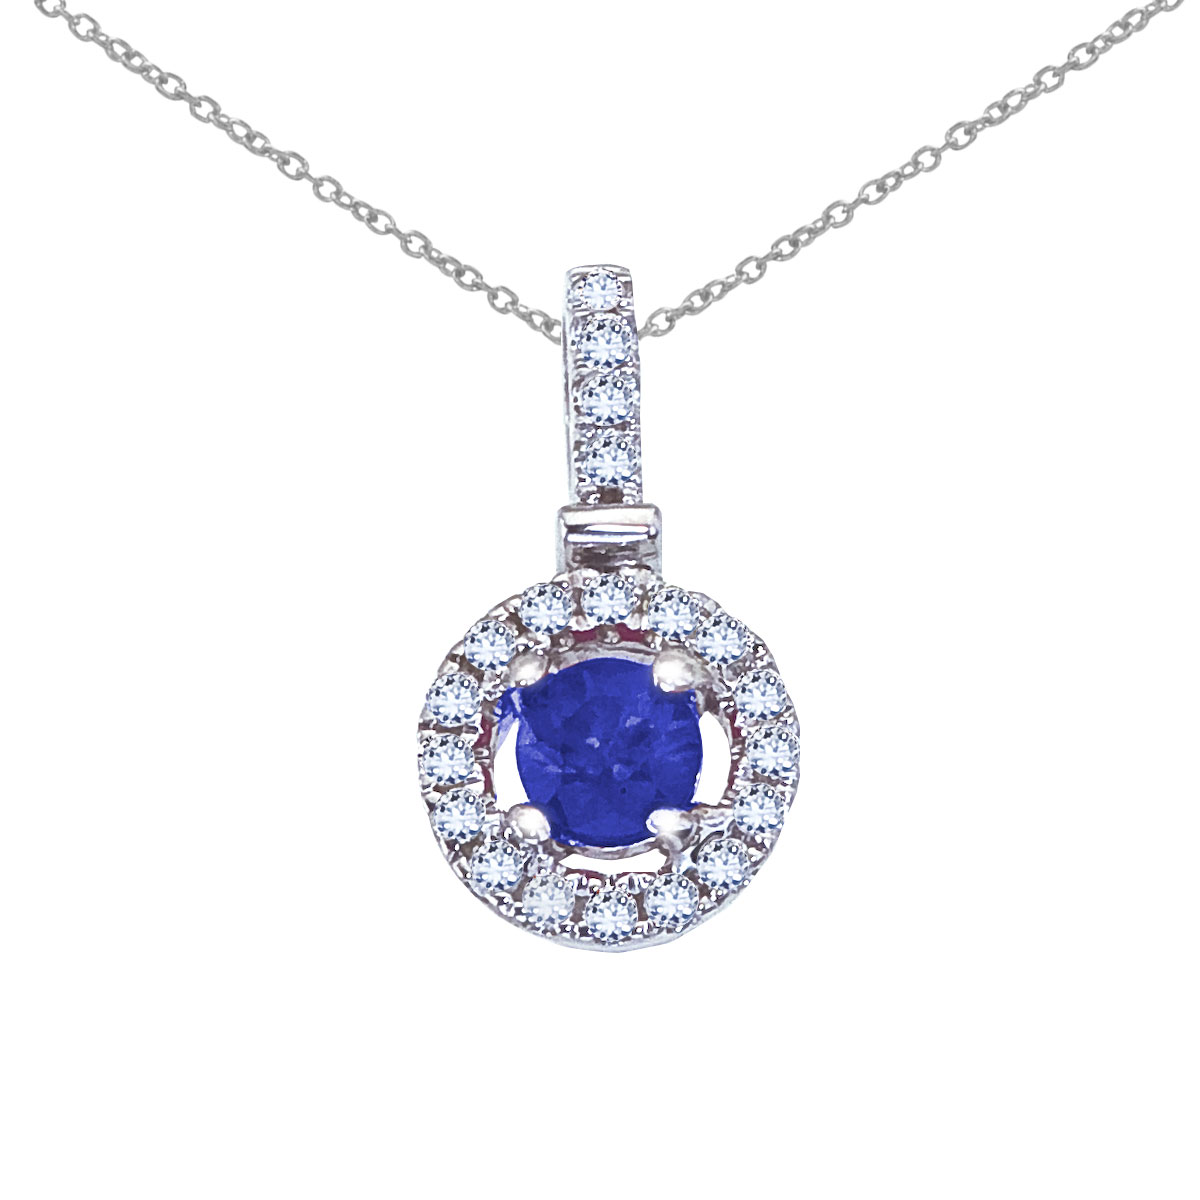 A stunning 3.8 mm sapphire surrounded .12 total ct diamonds set in a bright 14k white gold pendant.